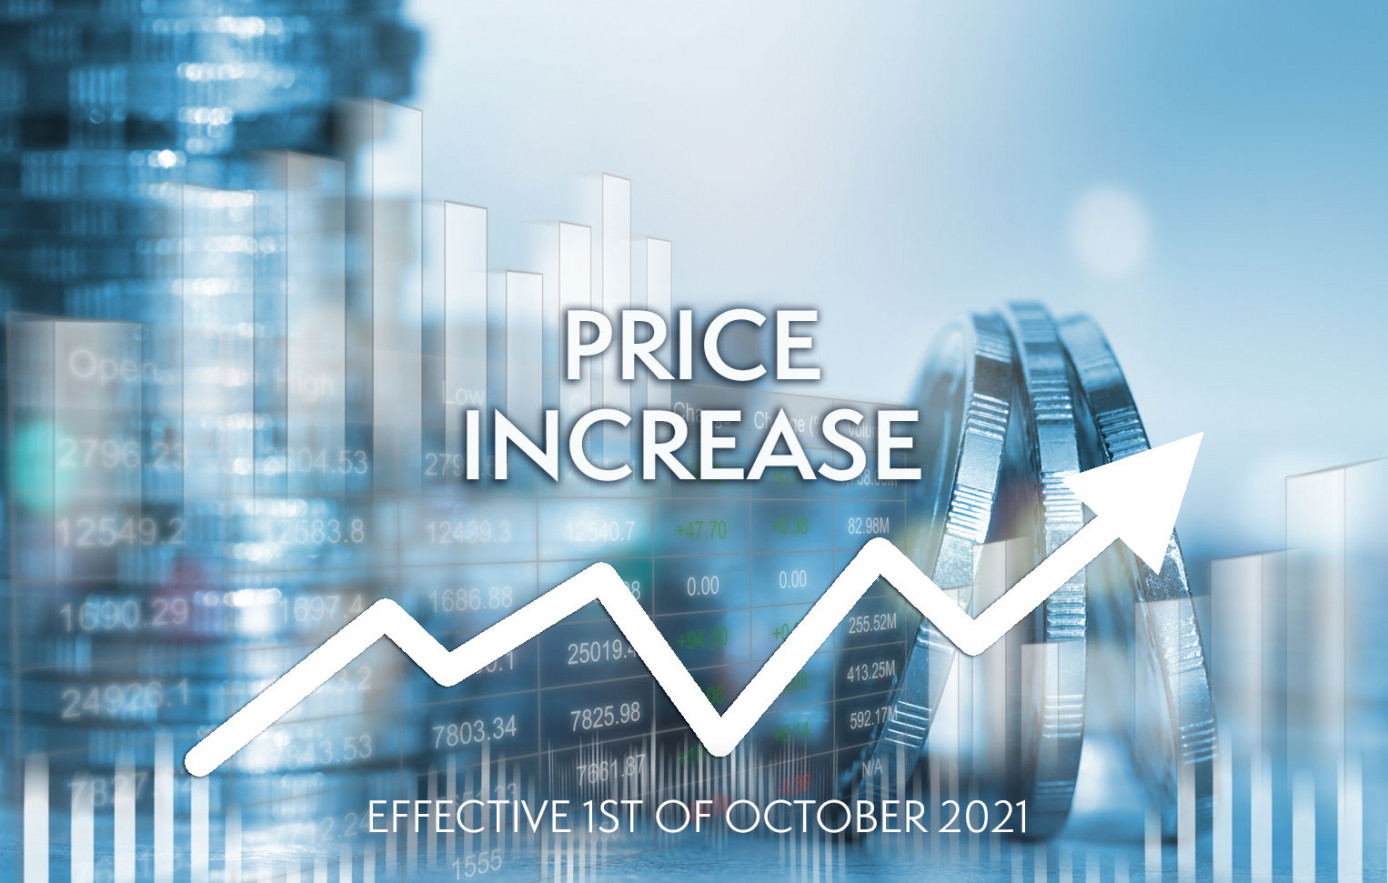 Graph and Coins Overlaid with Text "Price Increase Effective 1st October 2021"